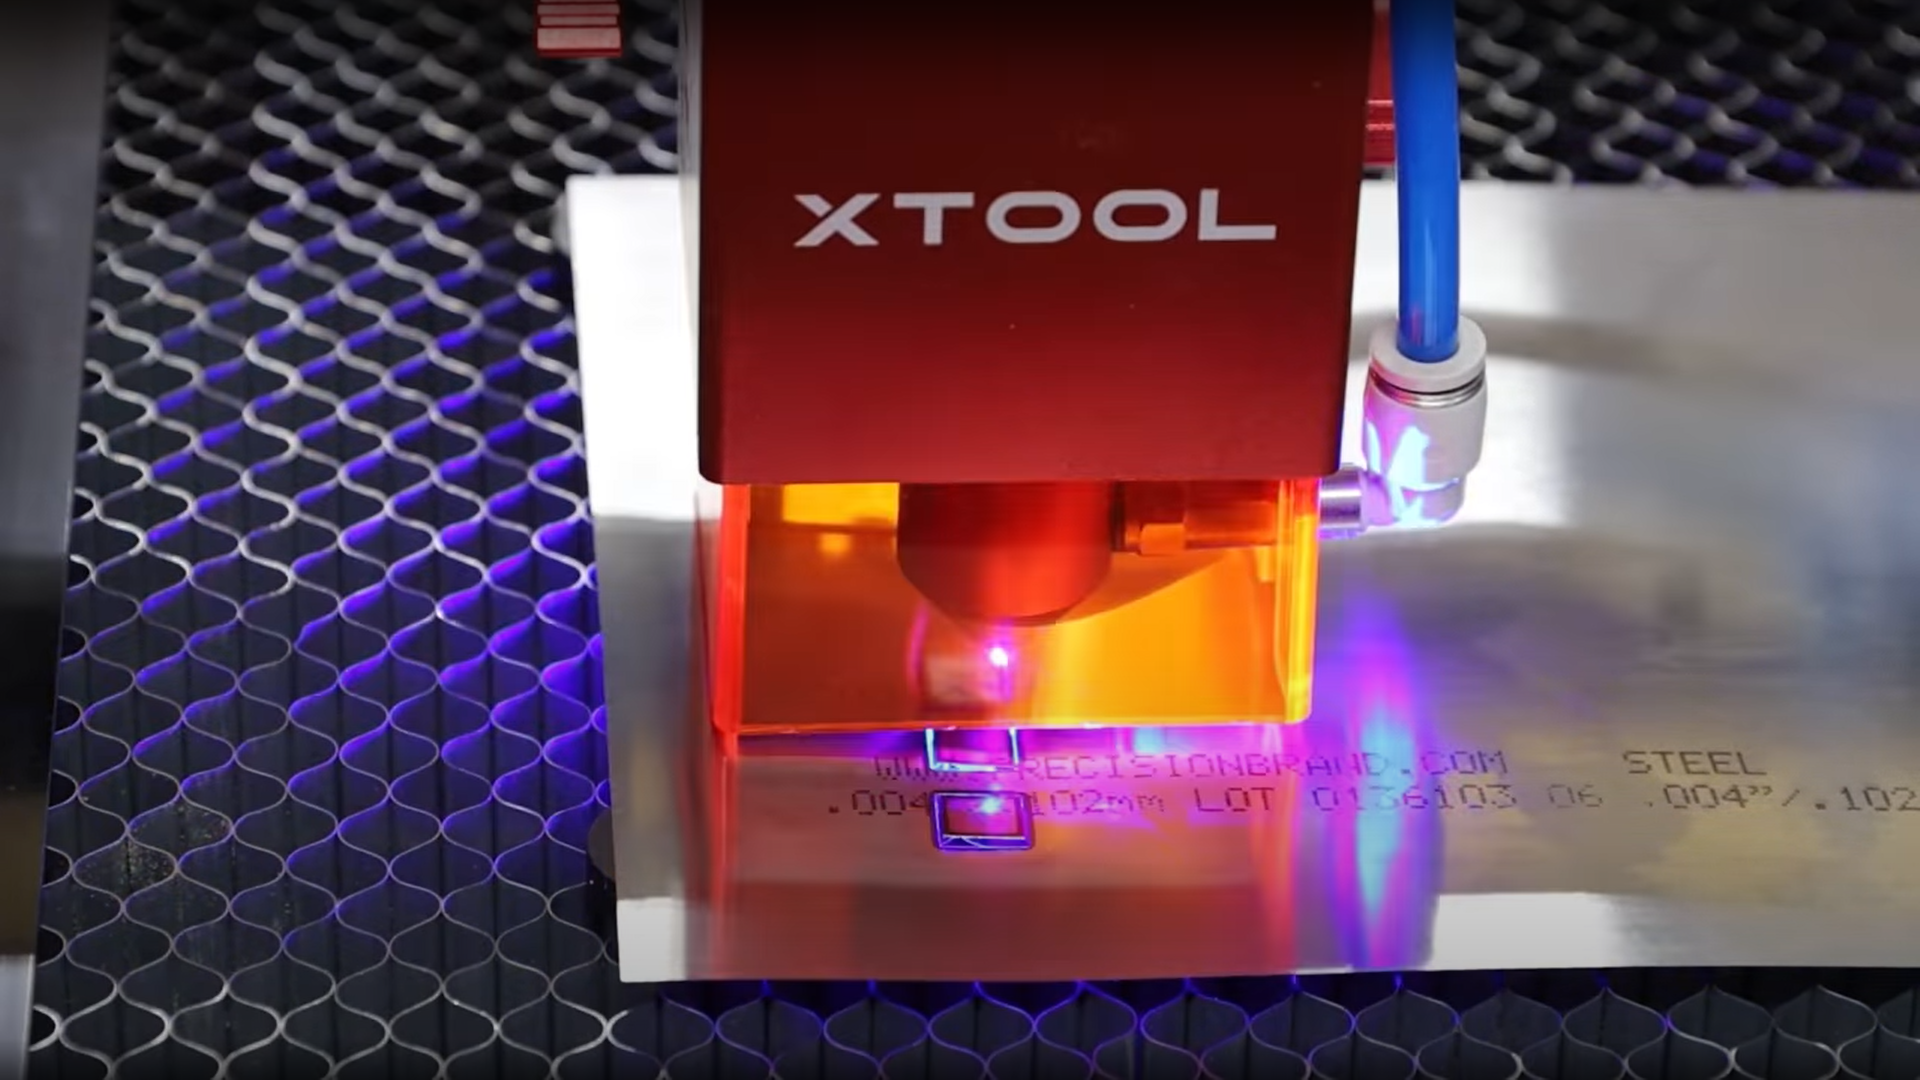 Cutting Metals With a Diode Laser?